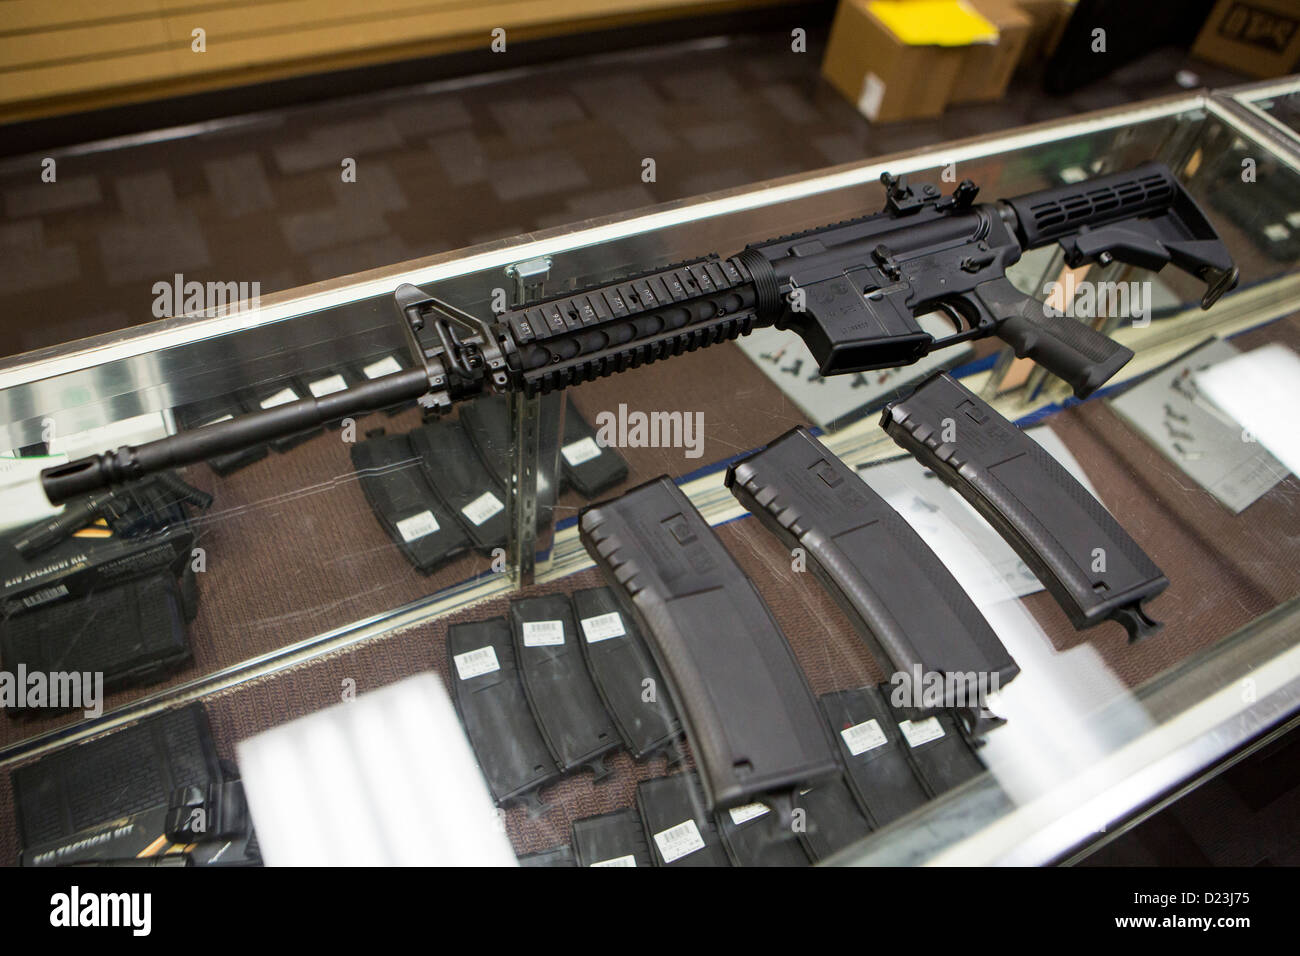 A Colt Defense M4A1 Carbine assault rifle on display at a gun shop with high capacity 30 round magazines.  Stock Photo